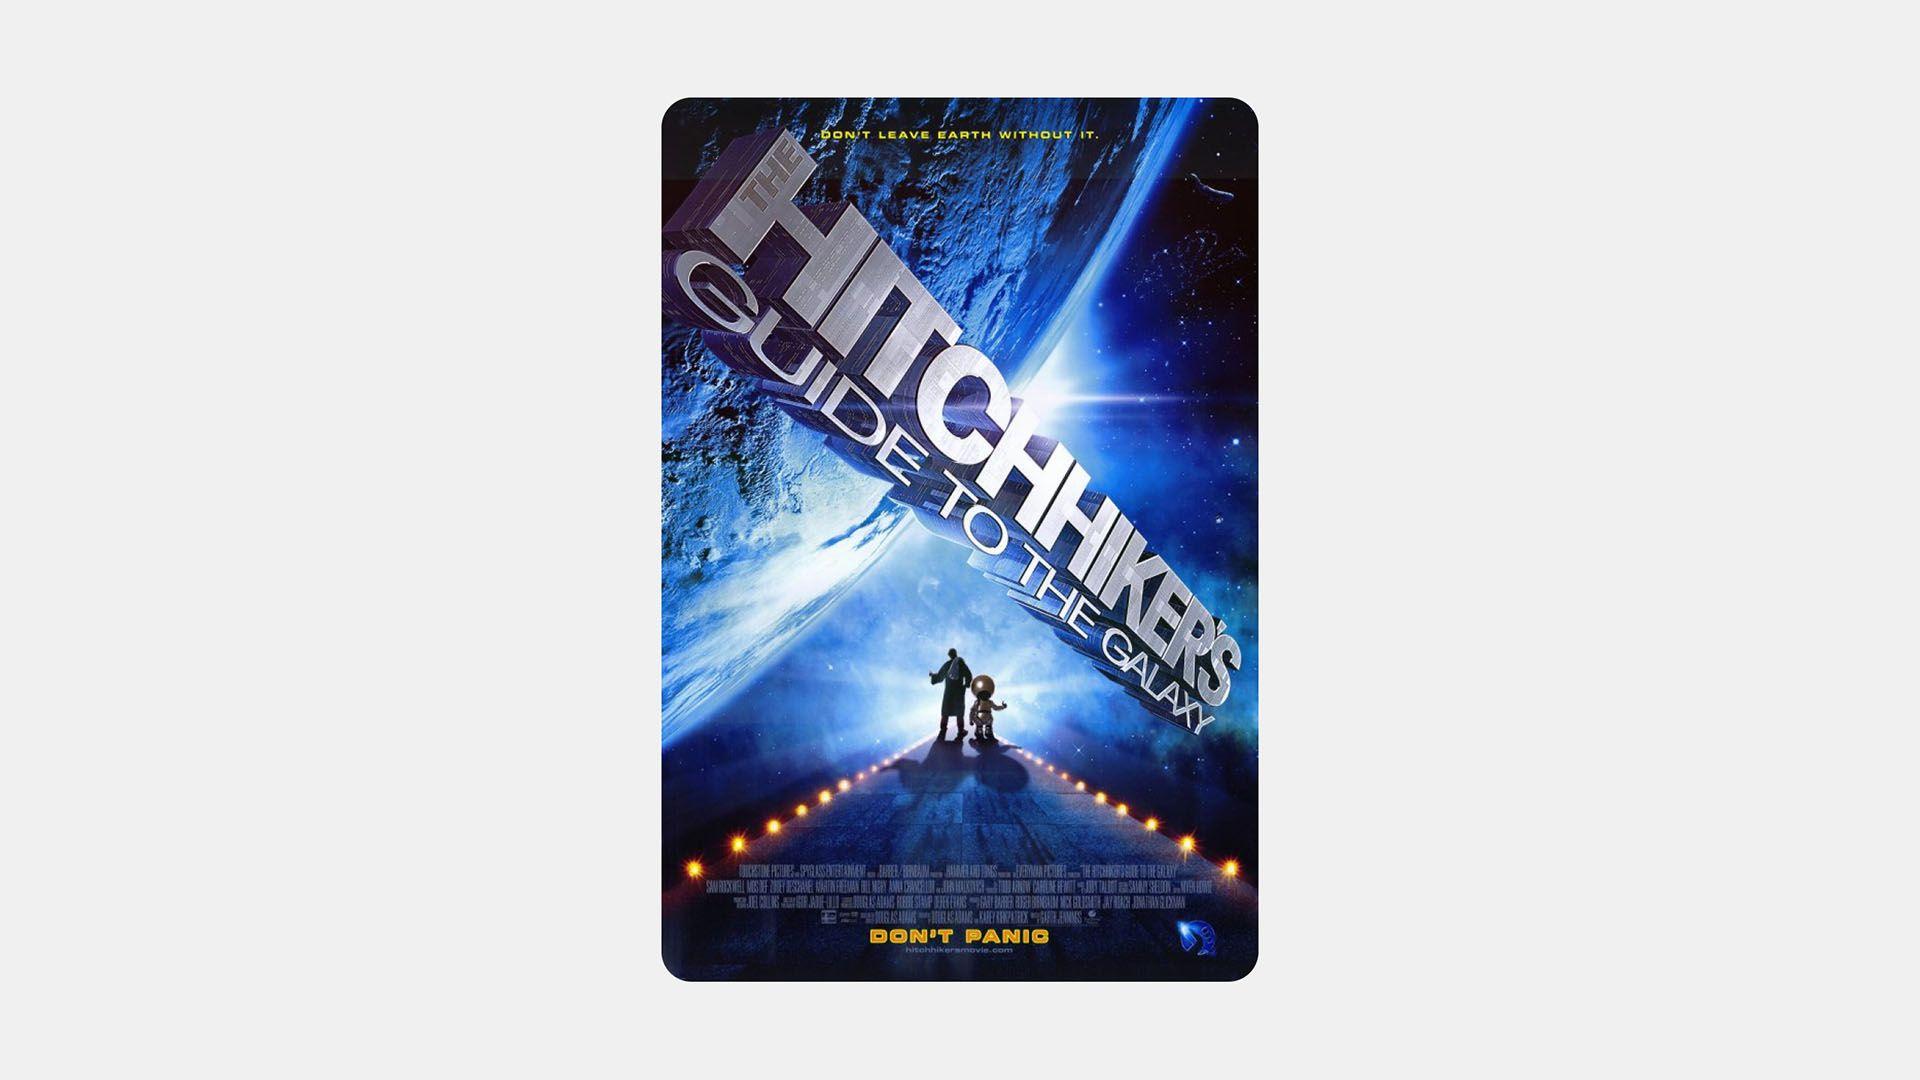 Hitchhikers Guide to the Galaxy Movie Poster